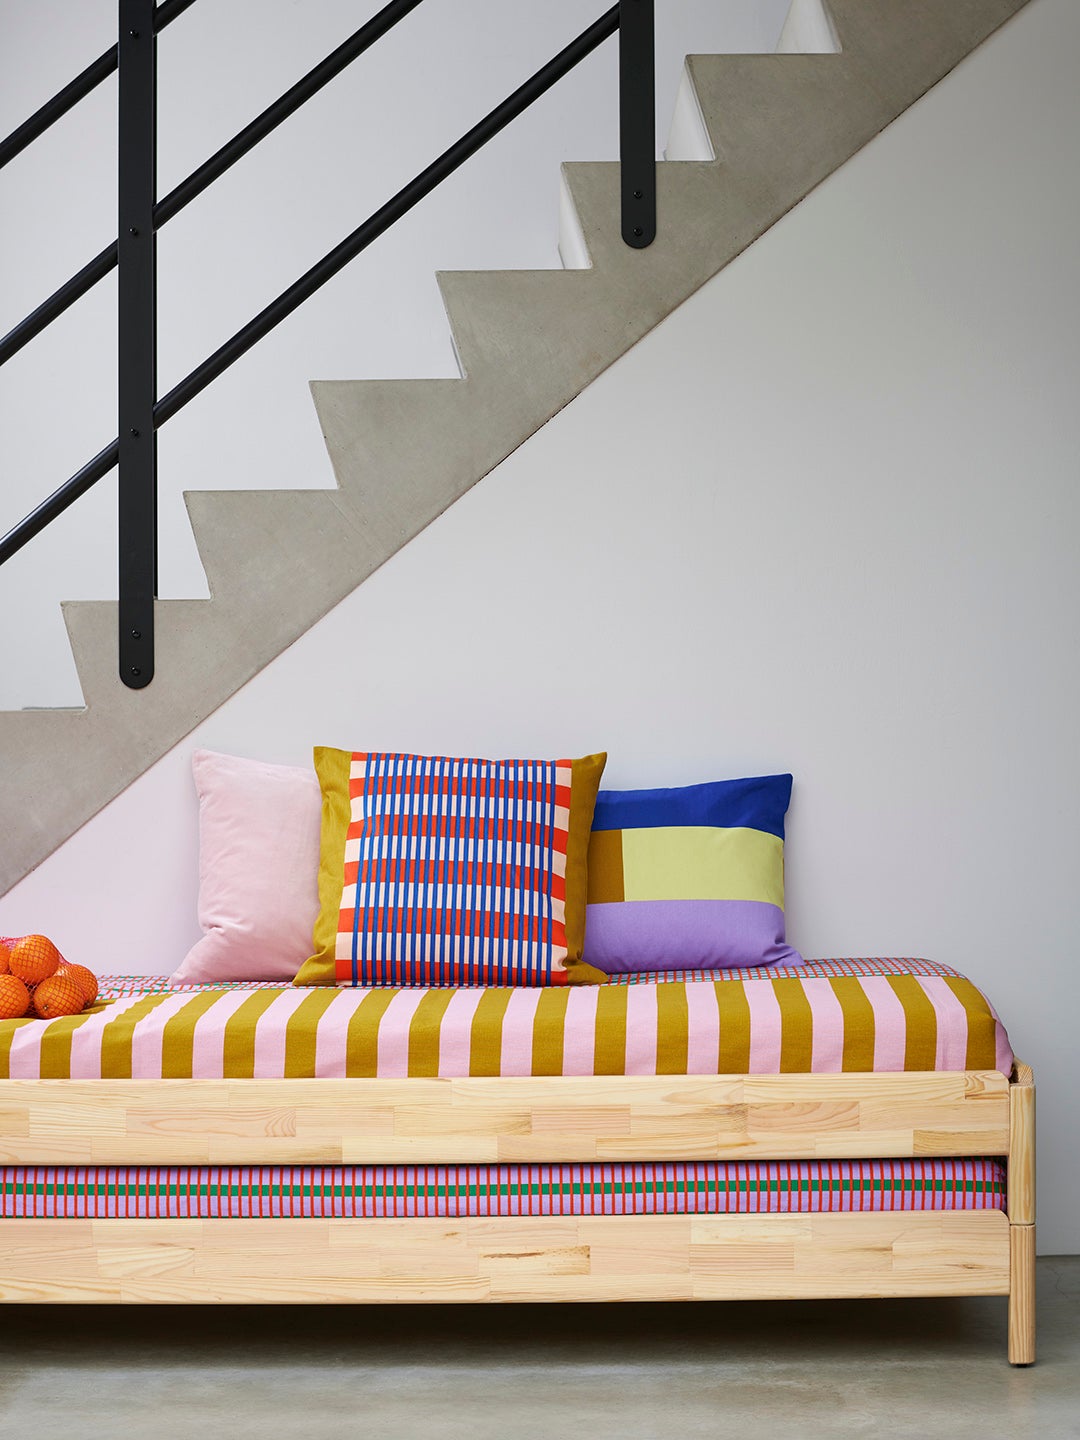 bench with striped pillows